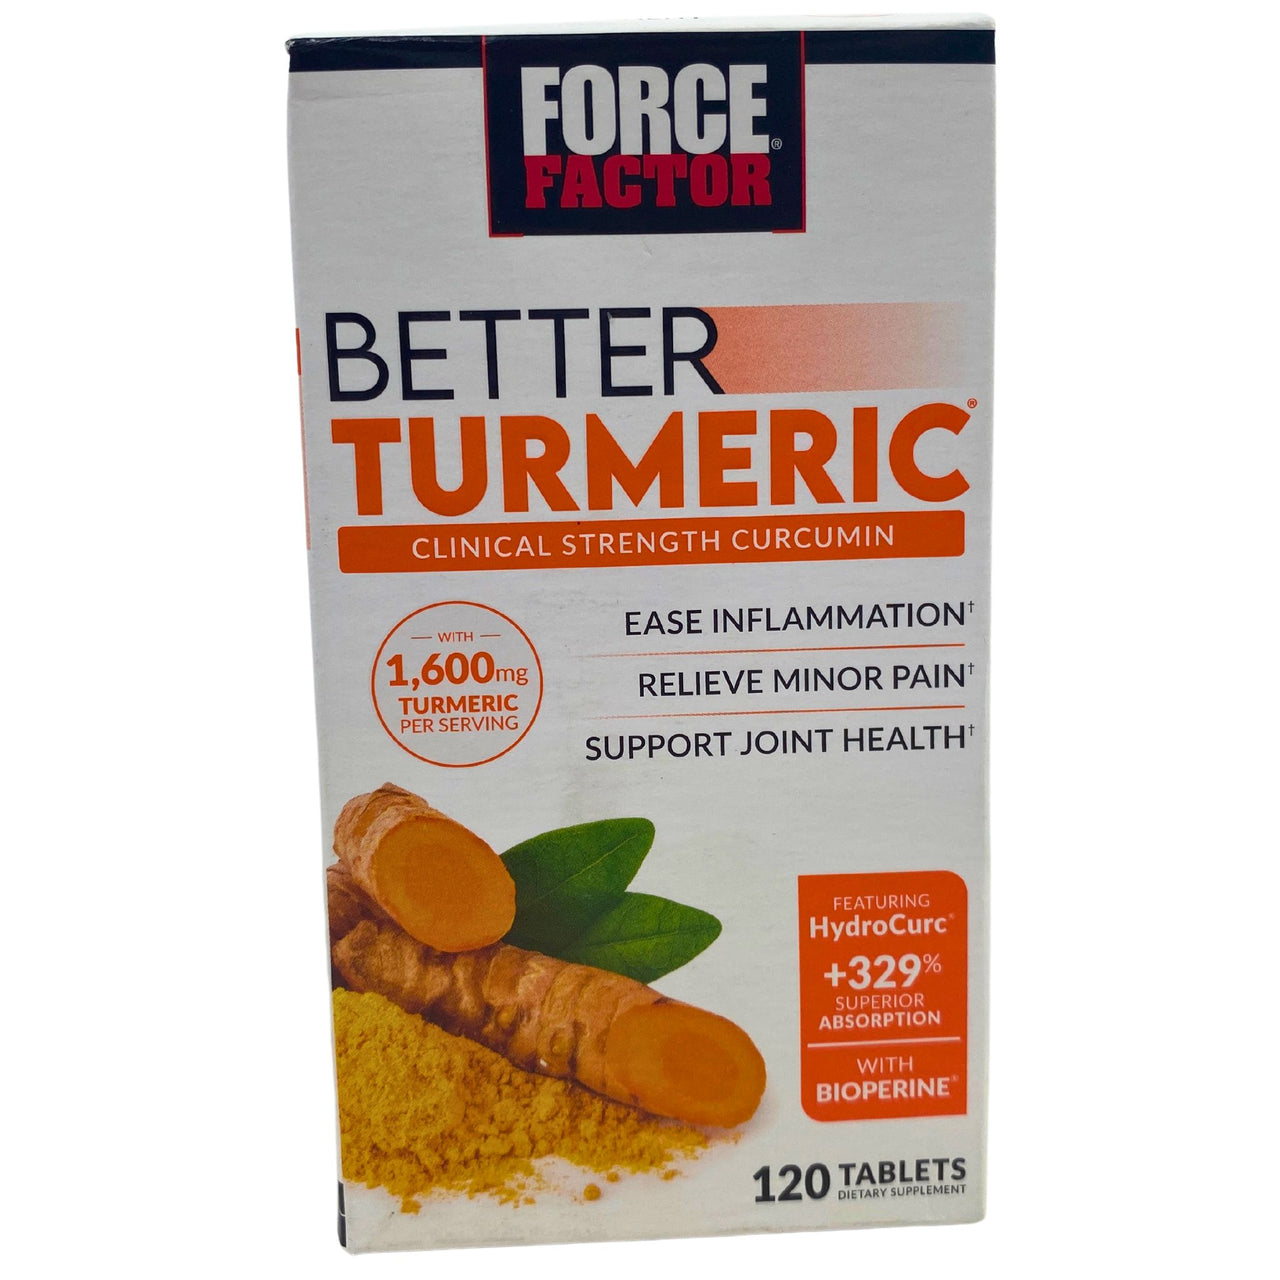 Force Factor Better Tumeric Clinical Strength Curcumin Ease Inflammation